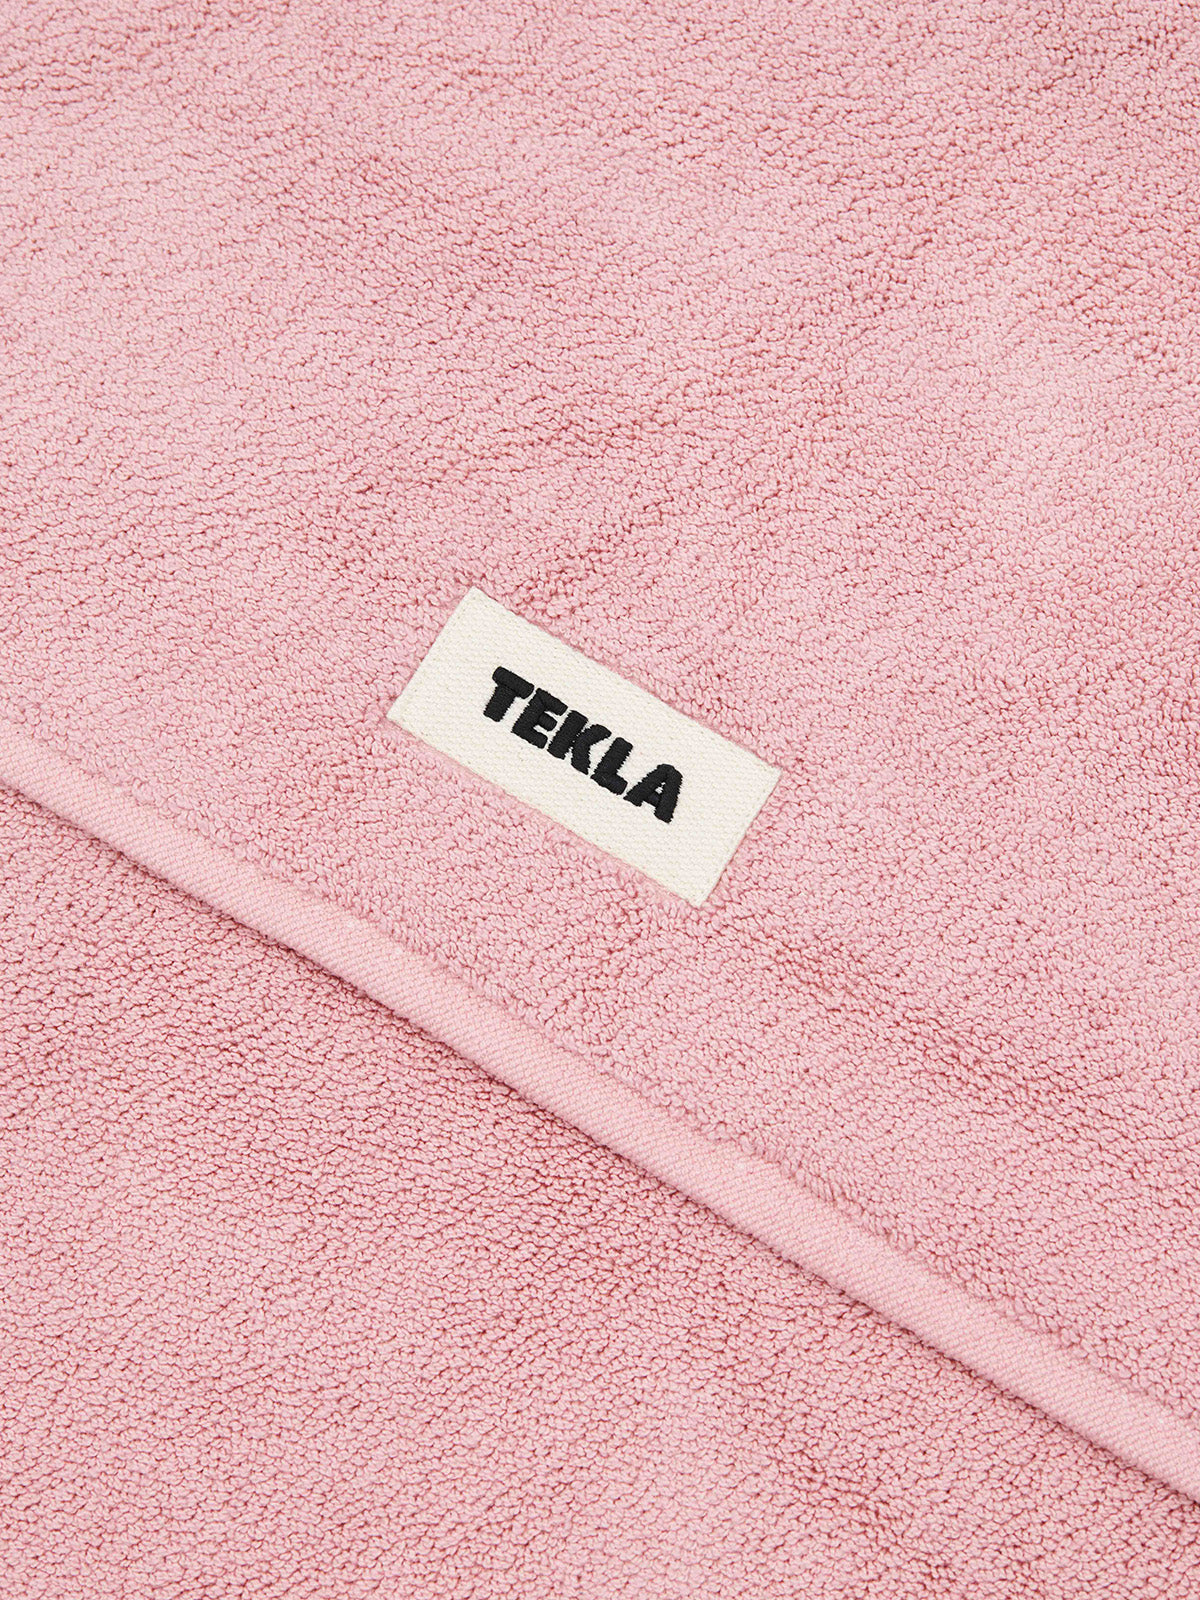 Bath Mat in Shaded Pink